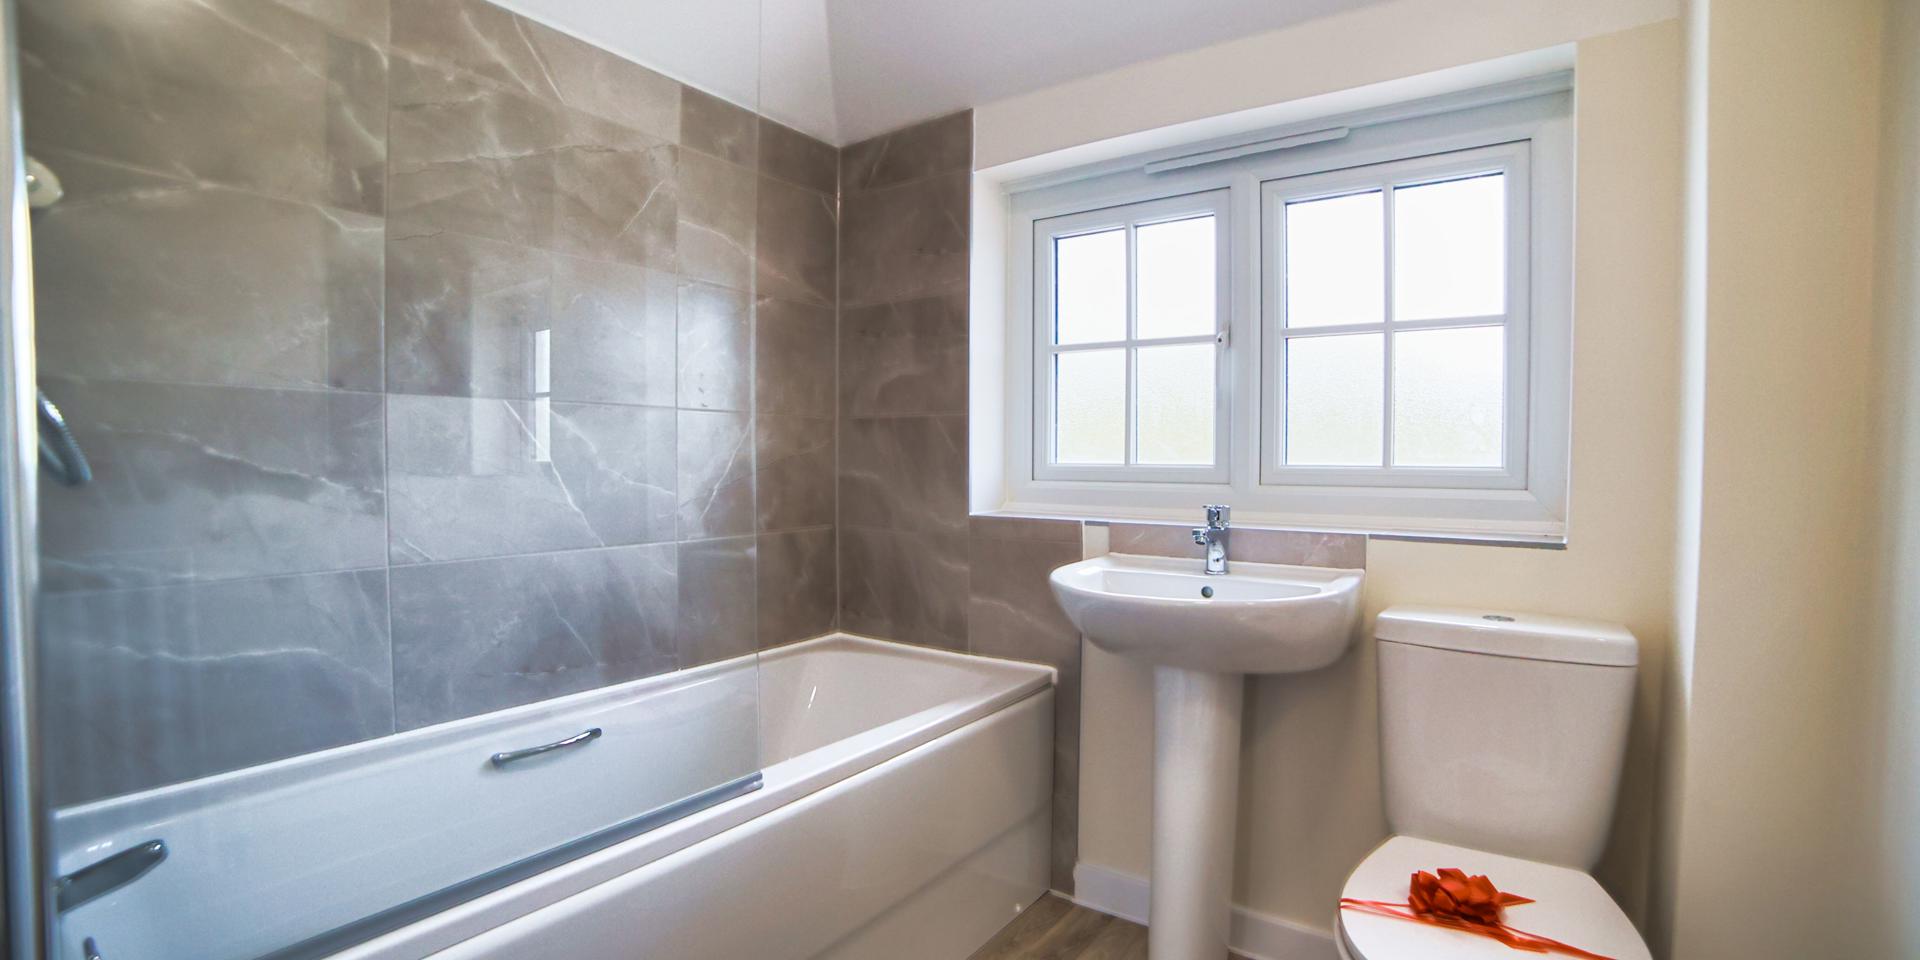 The bathroom with its white bathroom suite, bath and shower over the bath